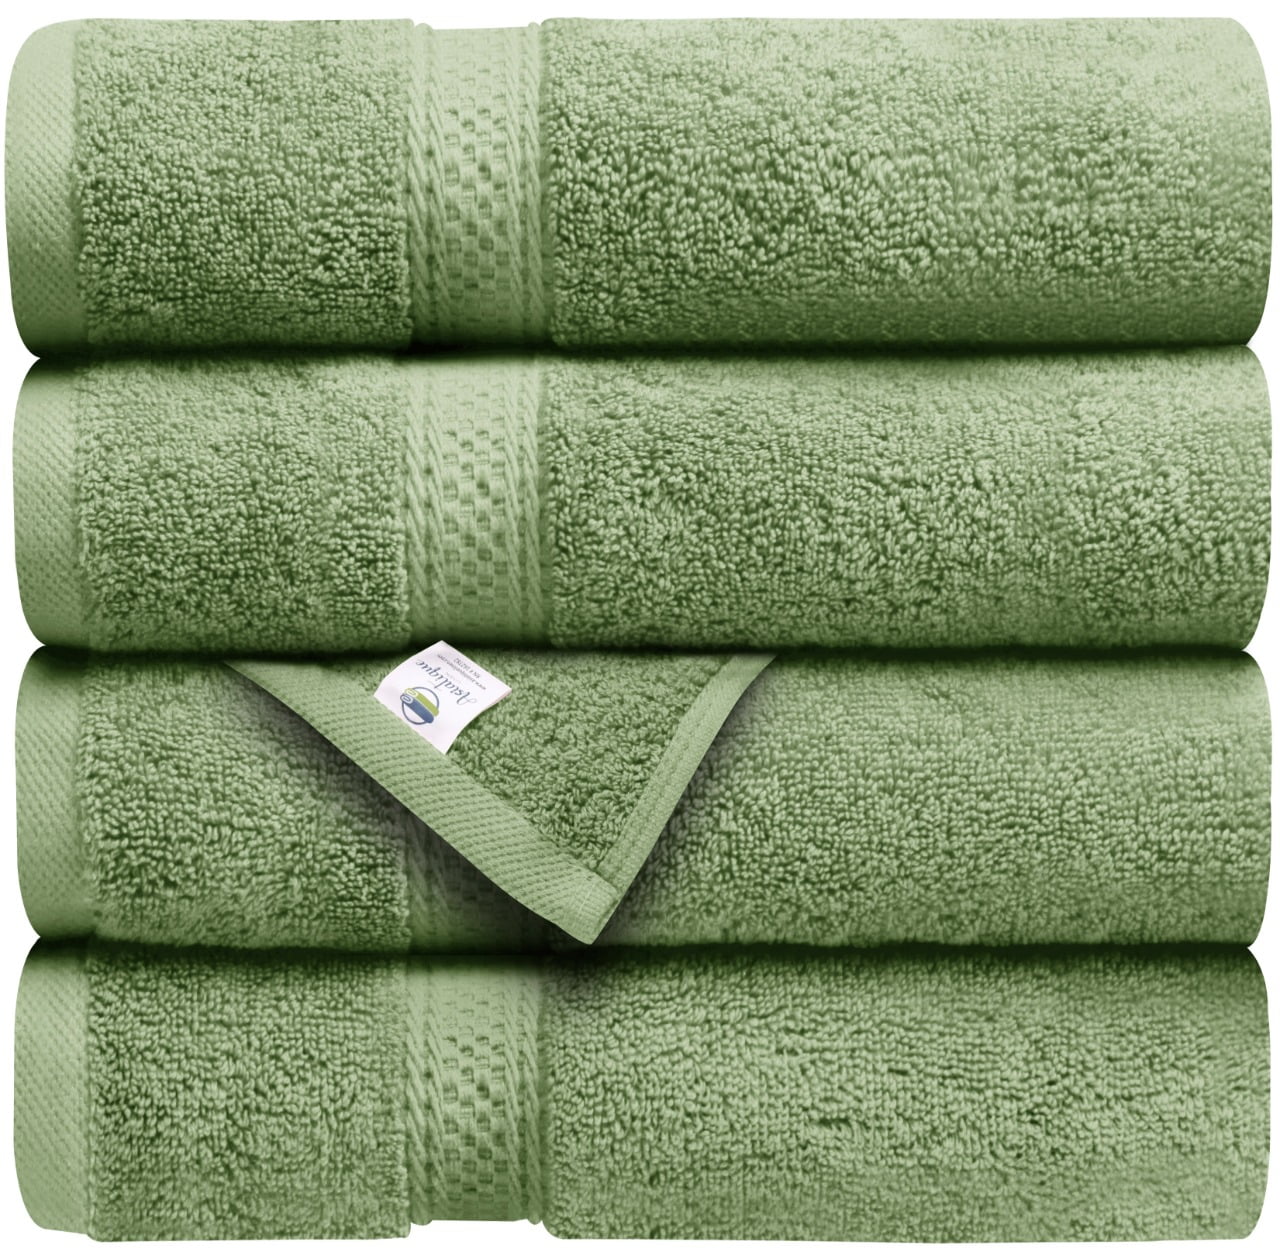 Details about   4 Pack Jumbo Bath Sheets Towels 100% Egyptian Cotton Super Soft Wow Bargain New 